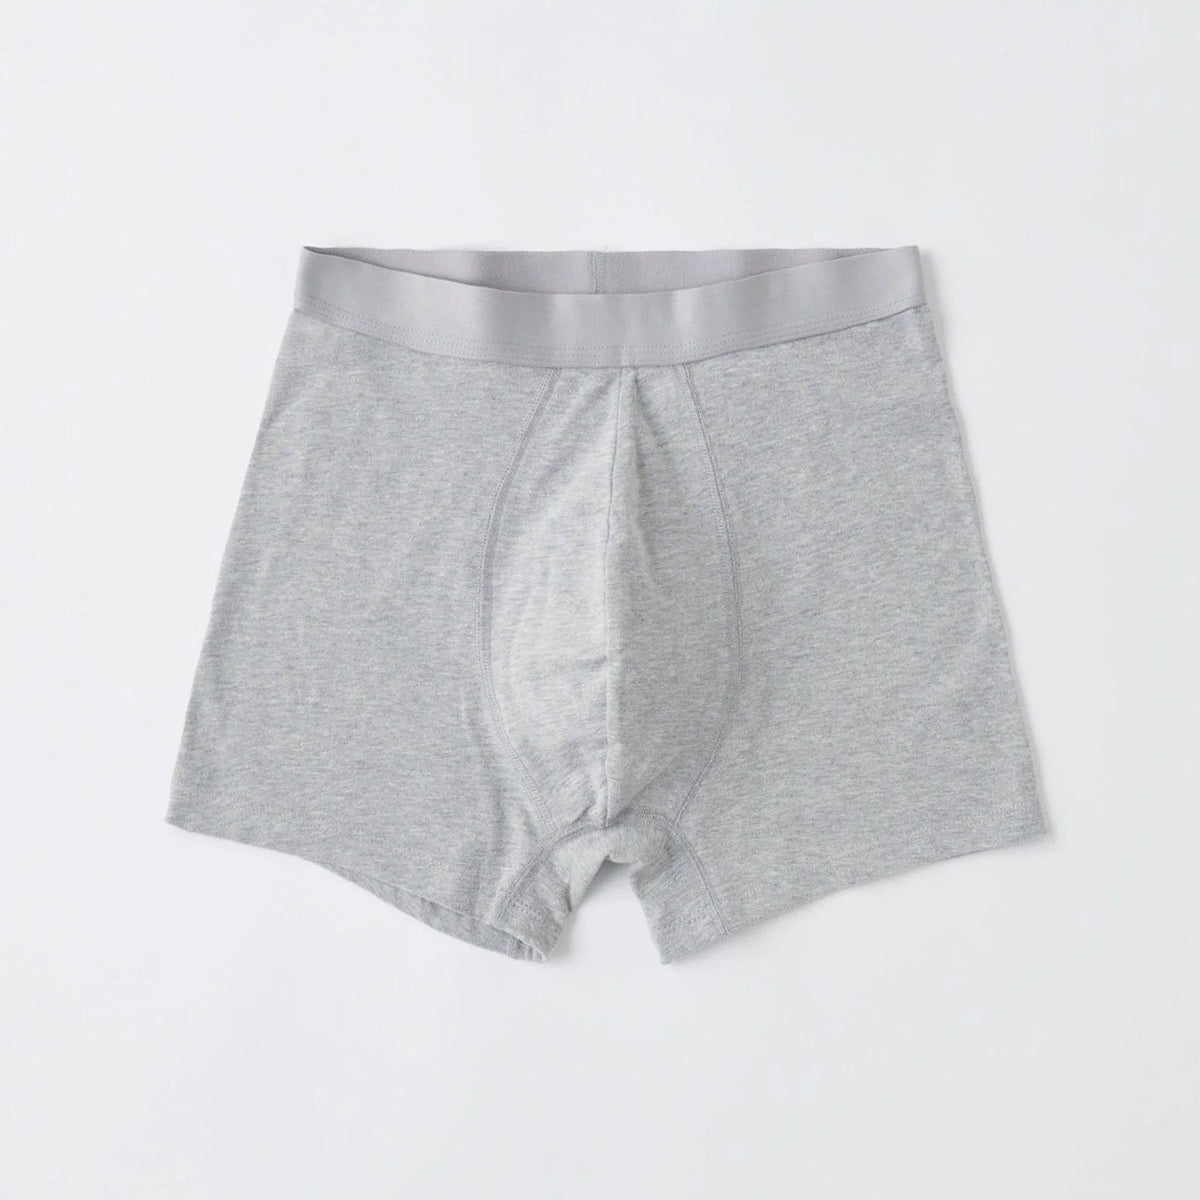 An Organic Basics men&#39;s grey boxer brief on a white background.